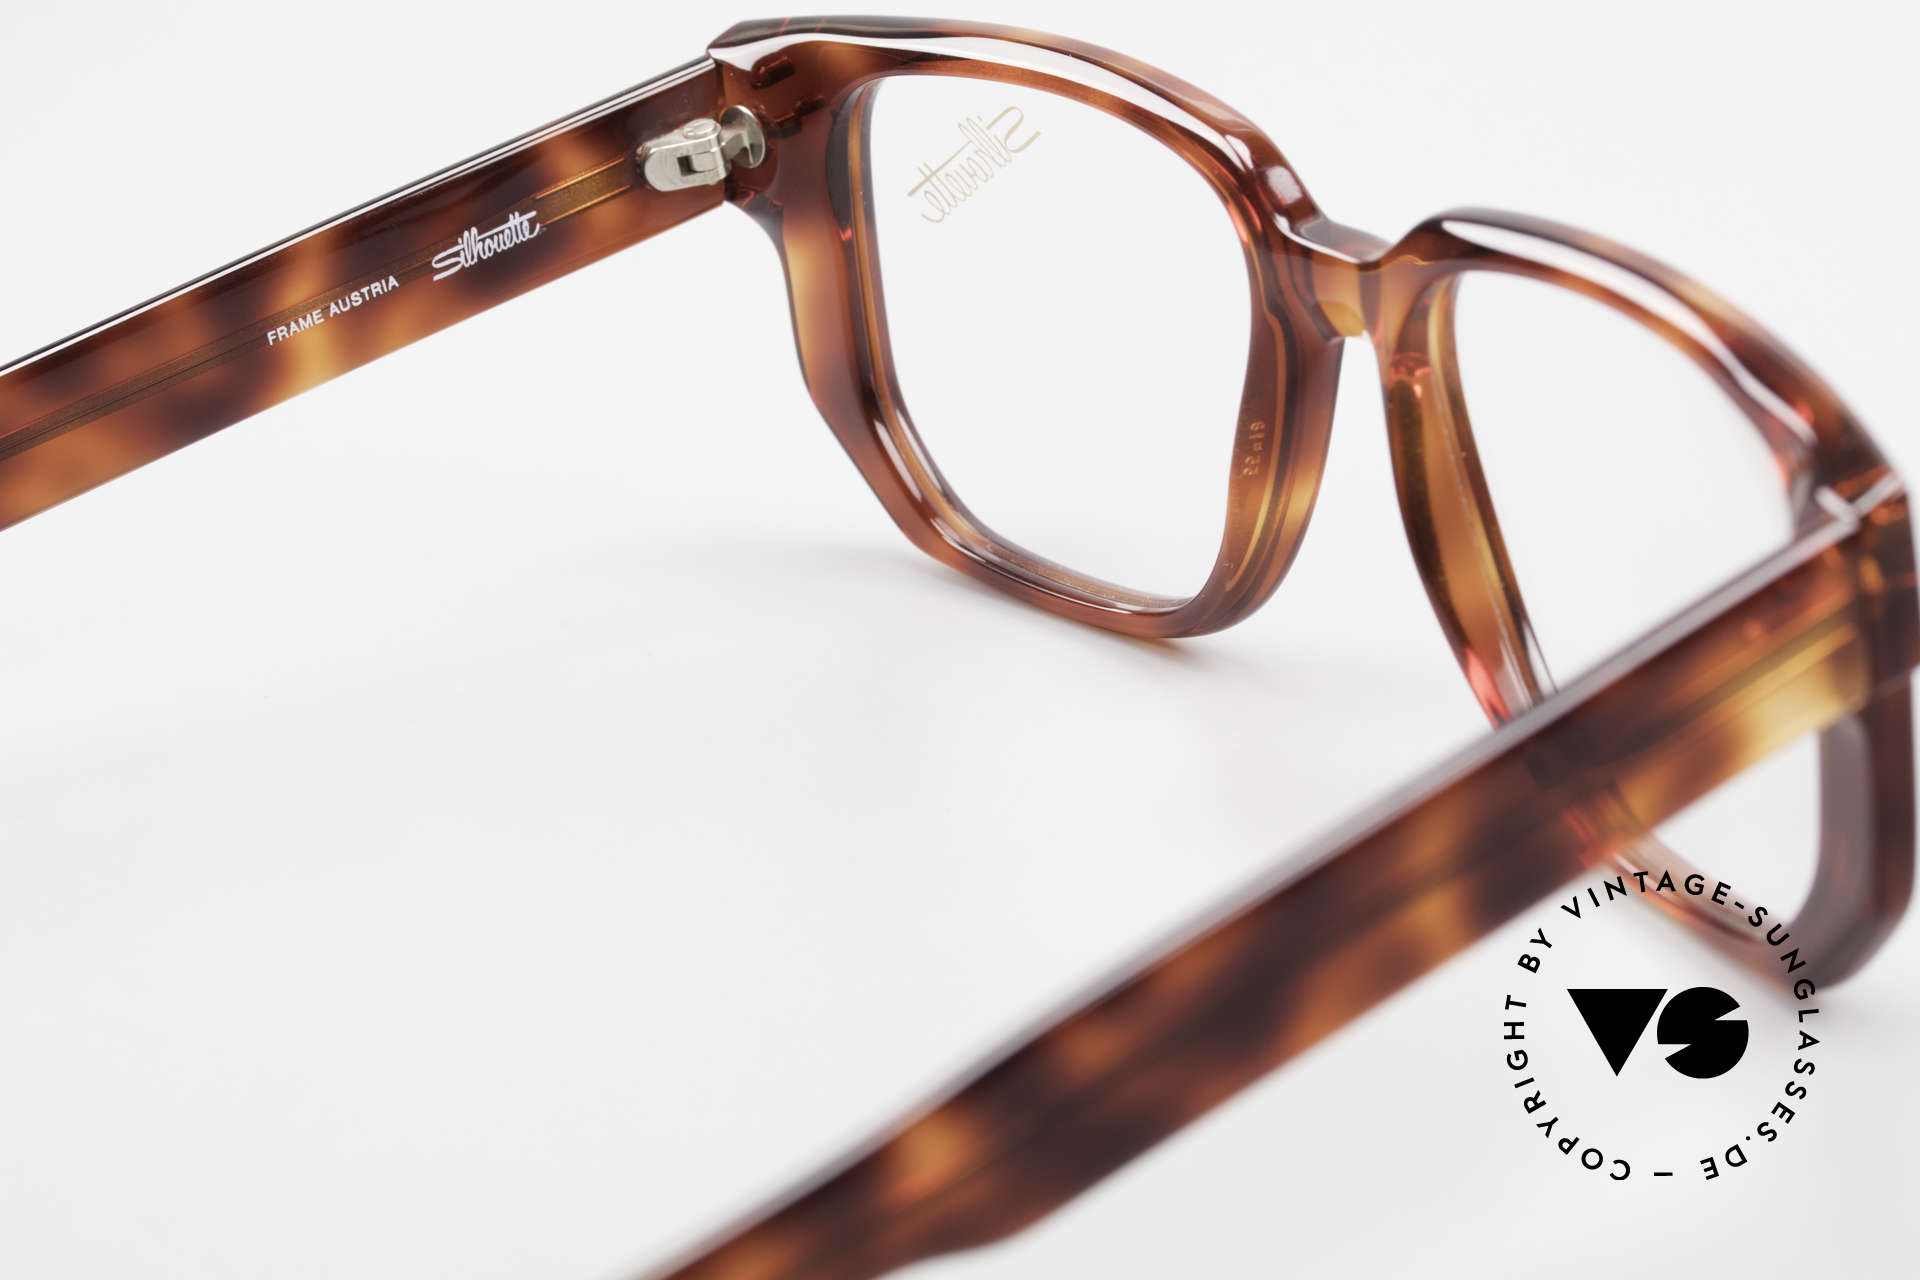 Silhouette M2097 1980's Old School Eyeglasses, NO retro frame, but truly 'OLD SCHOOL' vintage!, Made for Men